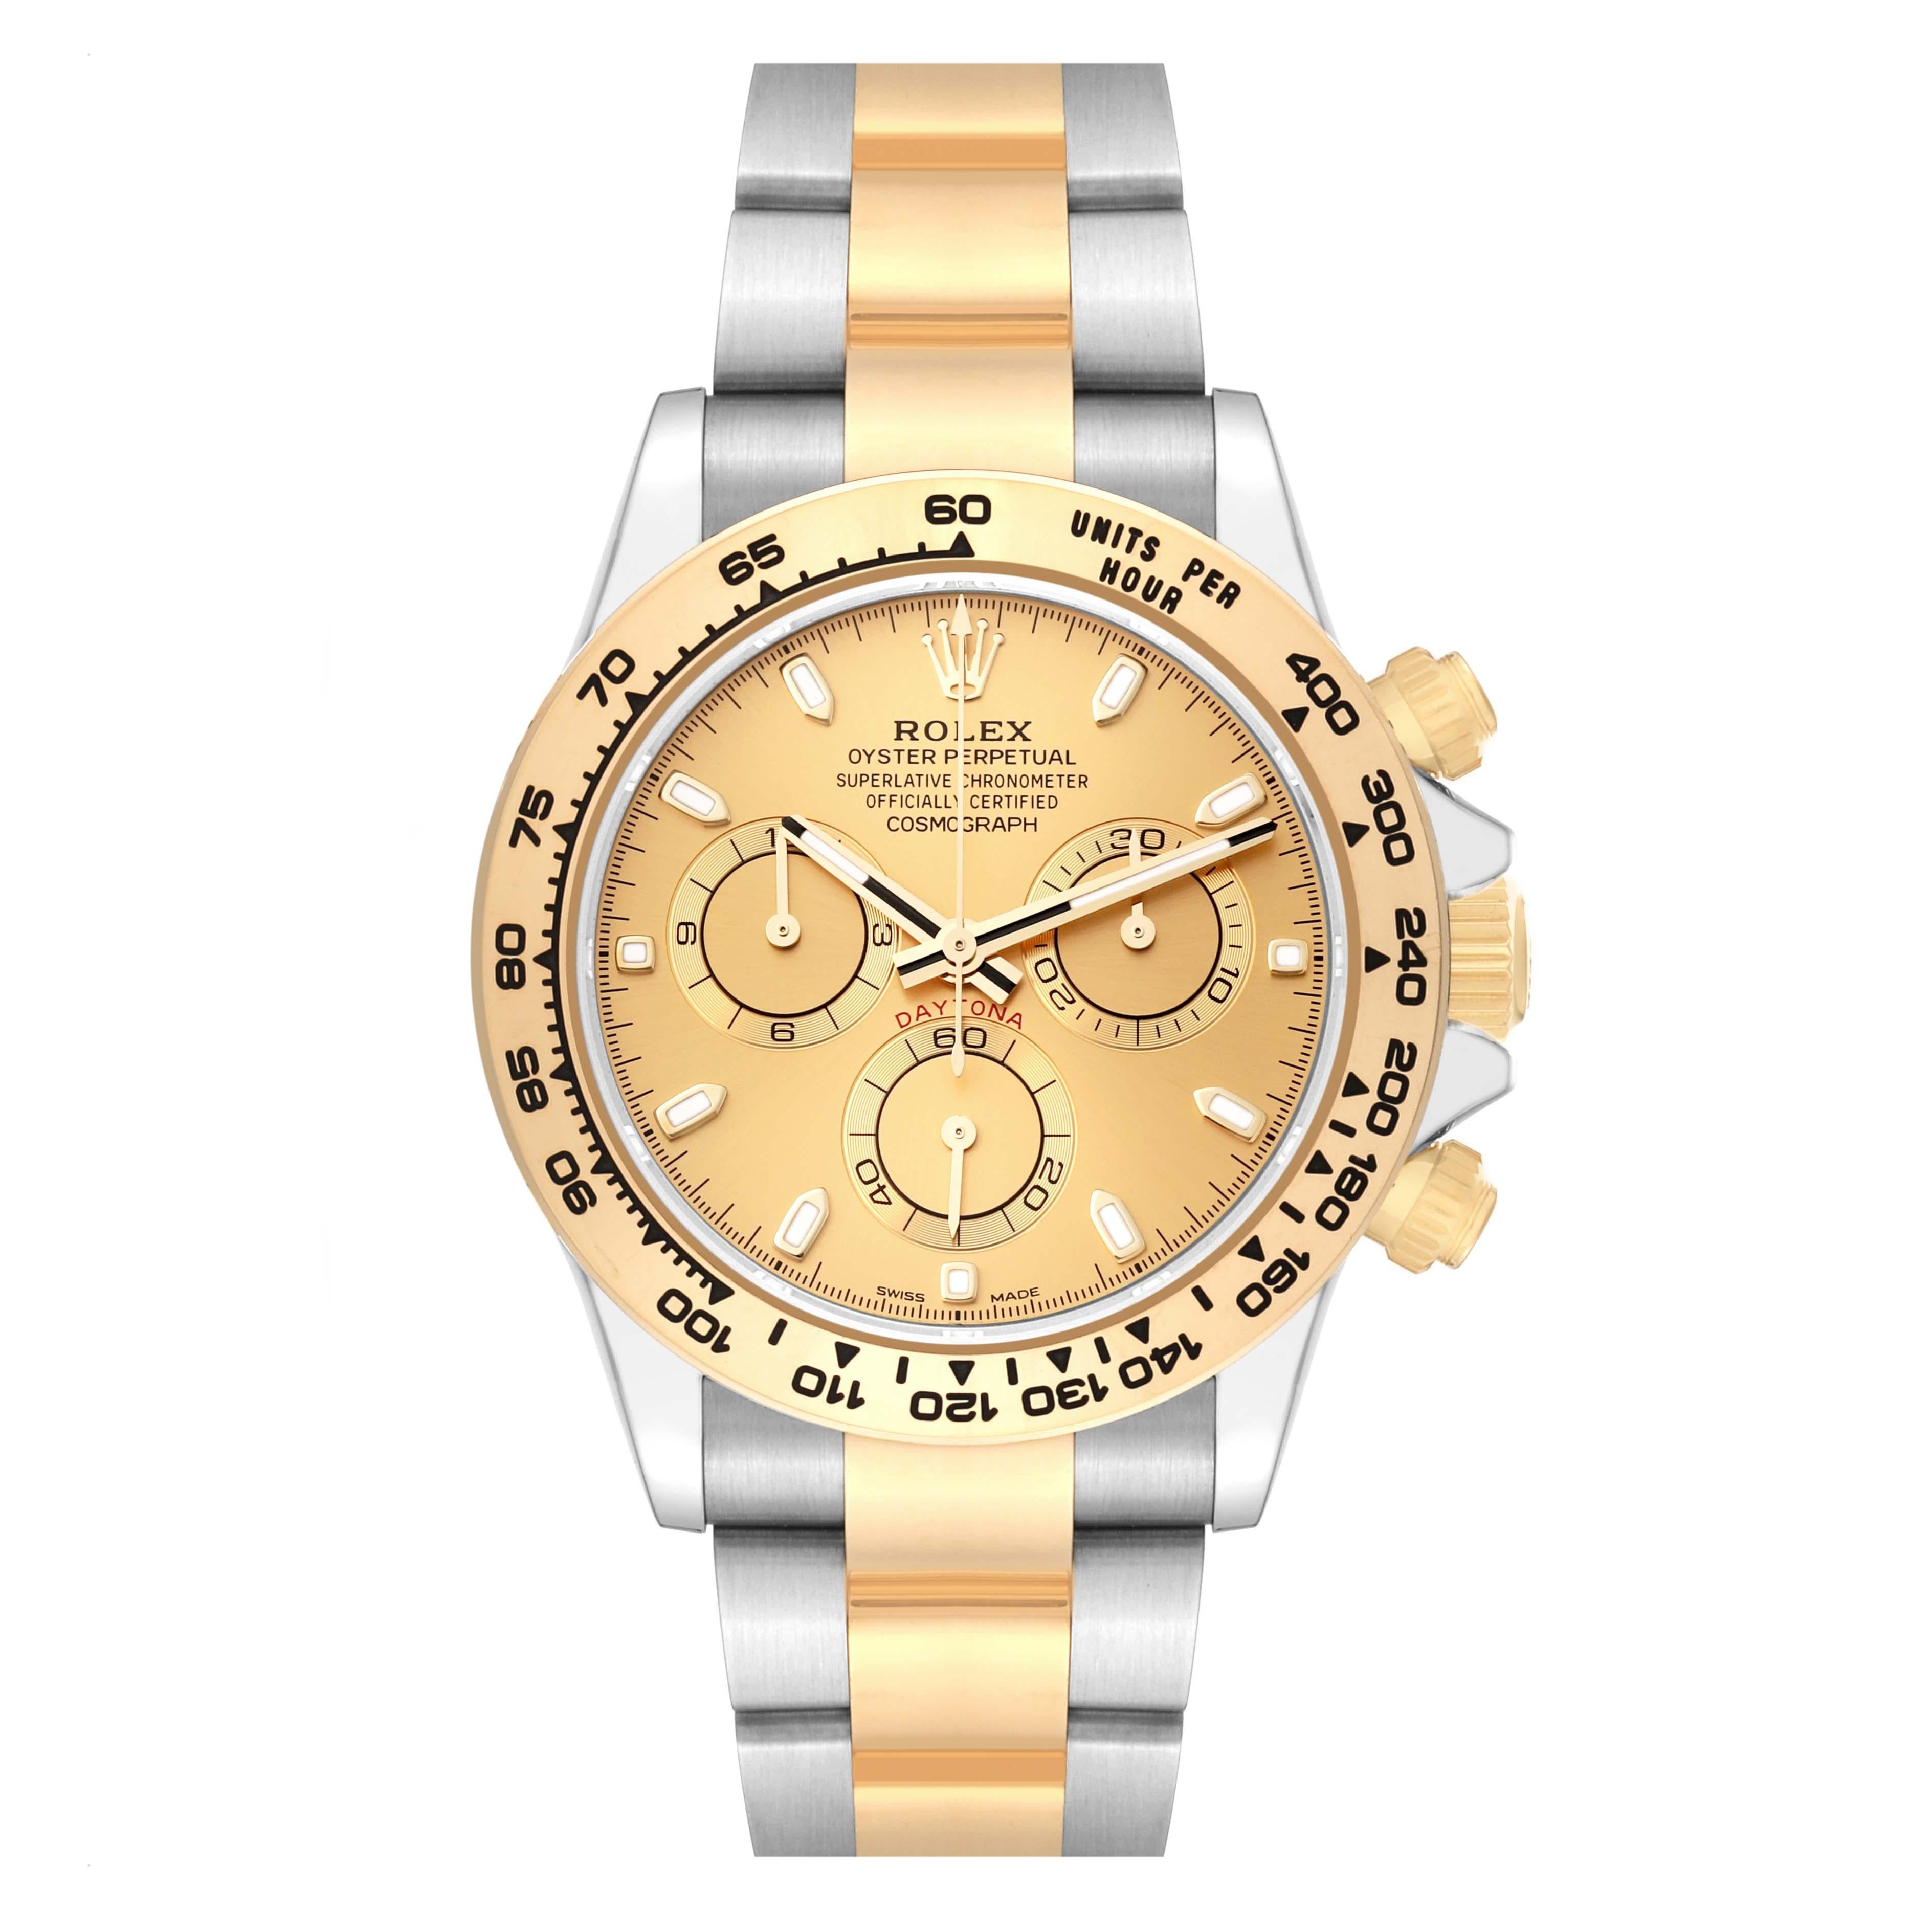 Rolex Daytona Champagne Dial Steel Yellow Gold Mens Watch 116503 Box Card In Excellent Condition For Sale In Atlanta, GA